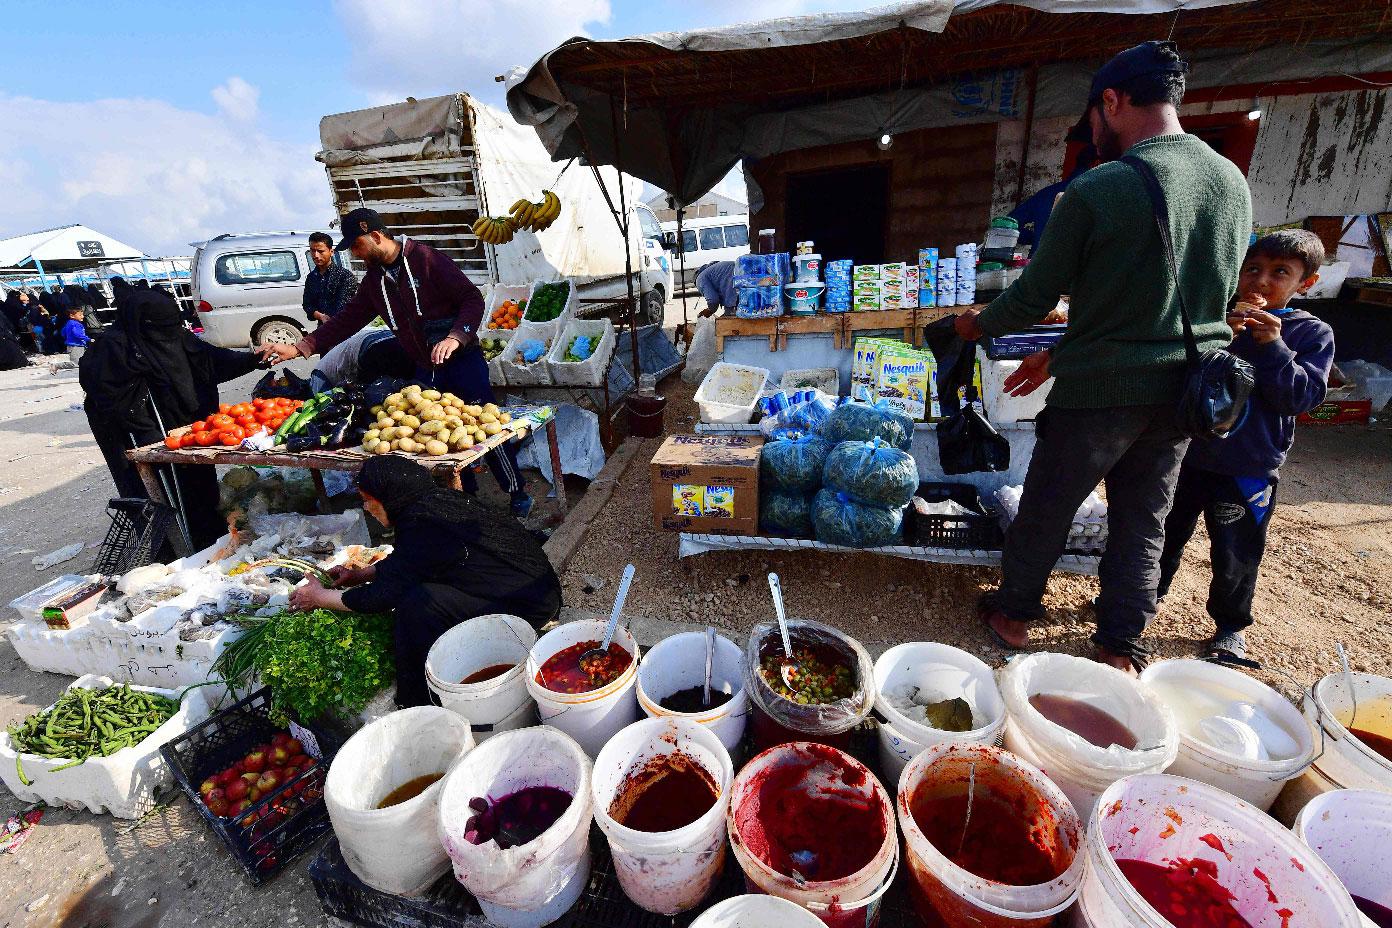 Street vendors sell pickles and vegetables on March 28, 2019 in the souk or market of Al-Hol camp for displaced people in northeastern Syria, which currently brims with more than 70,000 people, even though it was only designed to accommodate a seventh of that number.